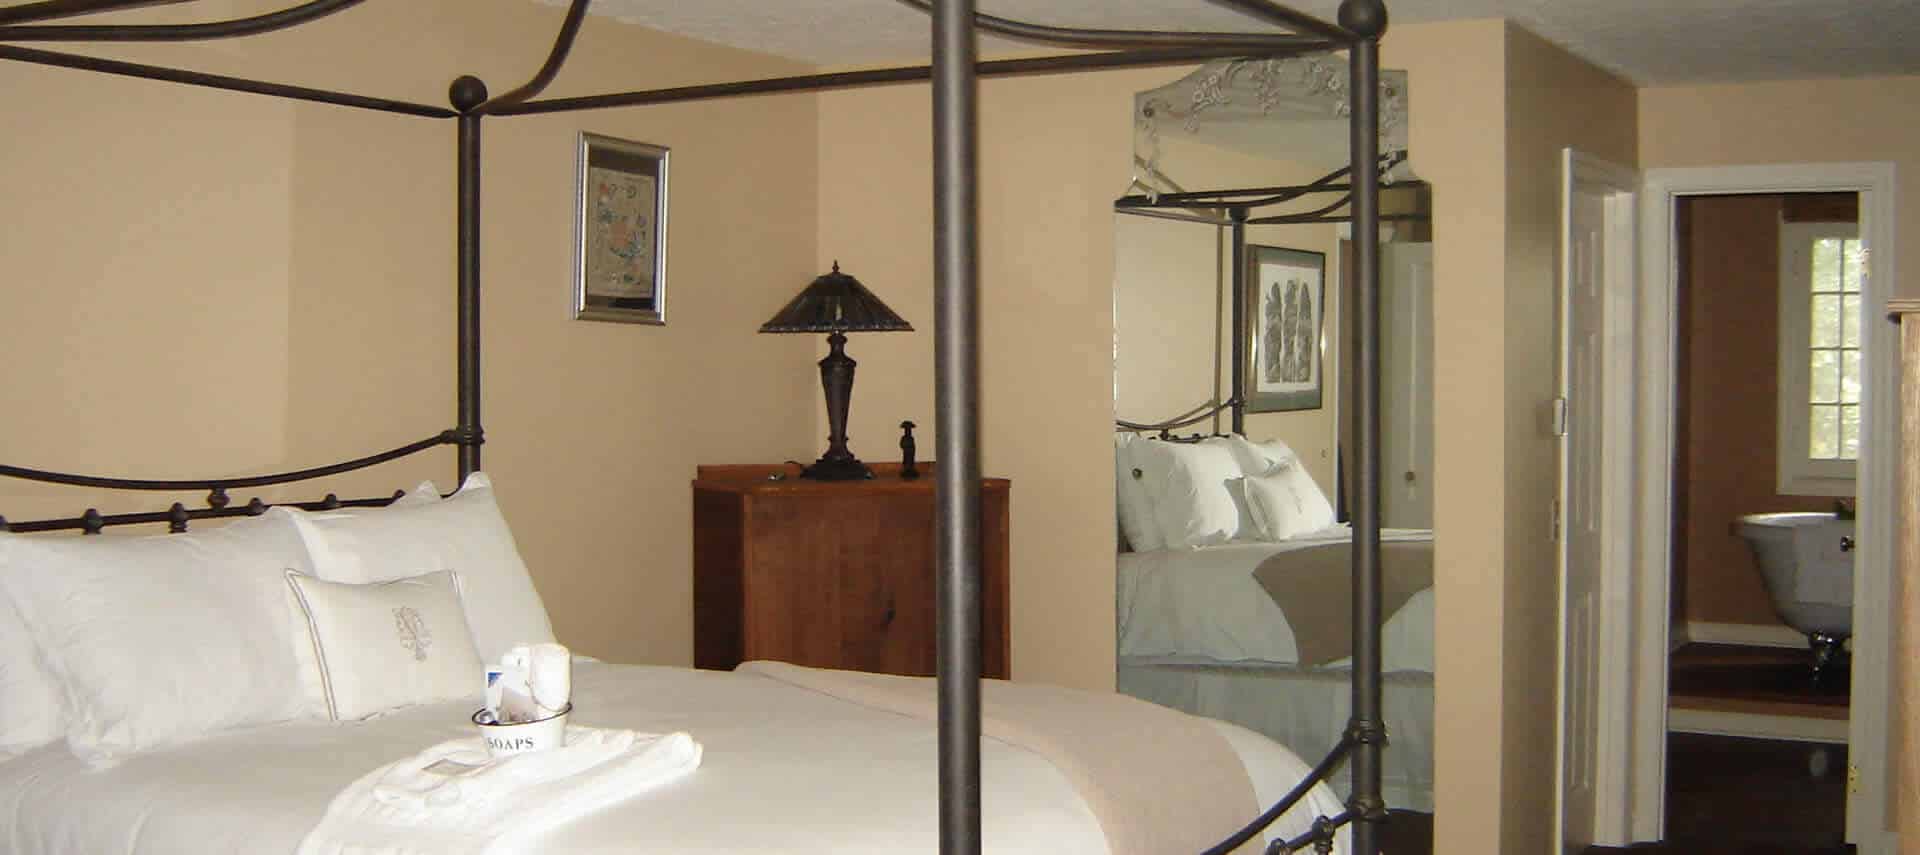 Graceful beige guestroom with a large iron canopy bed made up in white bedding, a dresser and mirror.